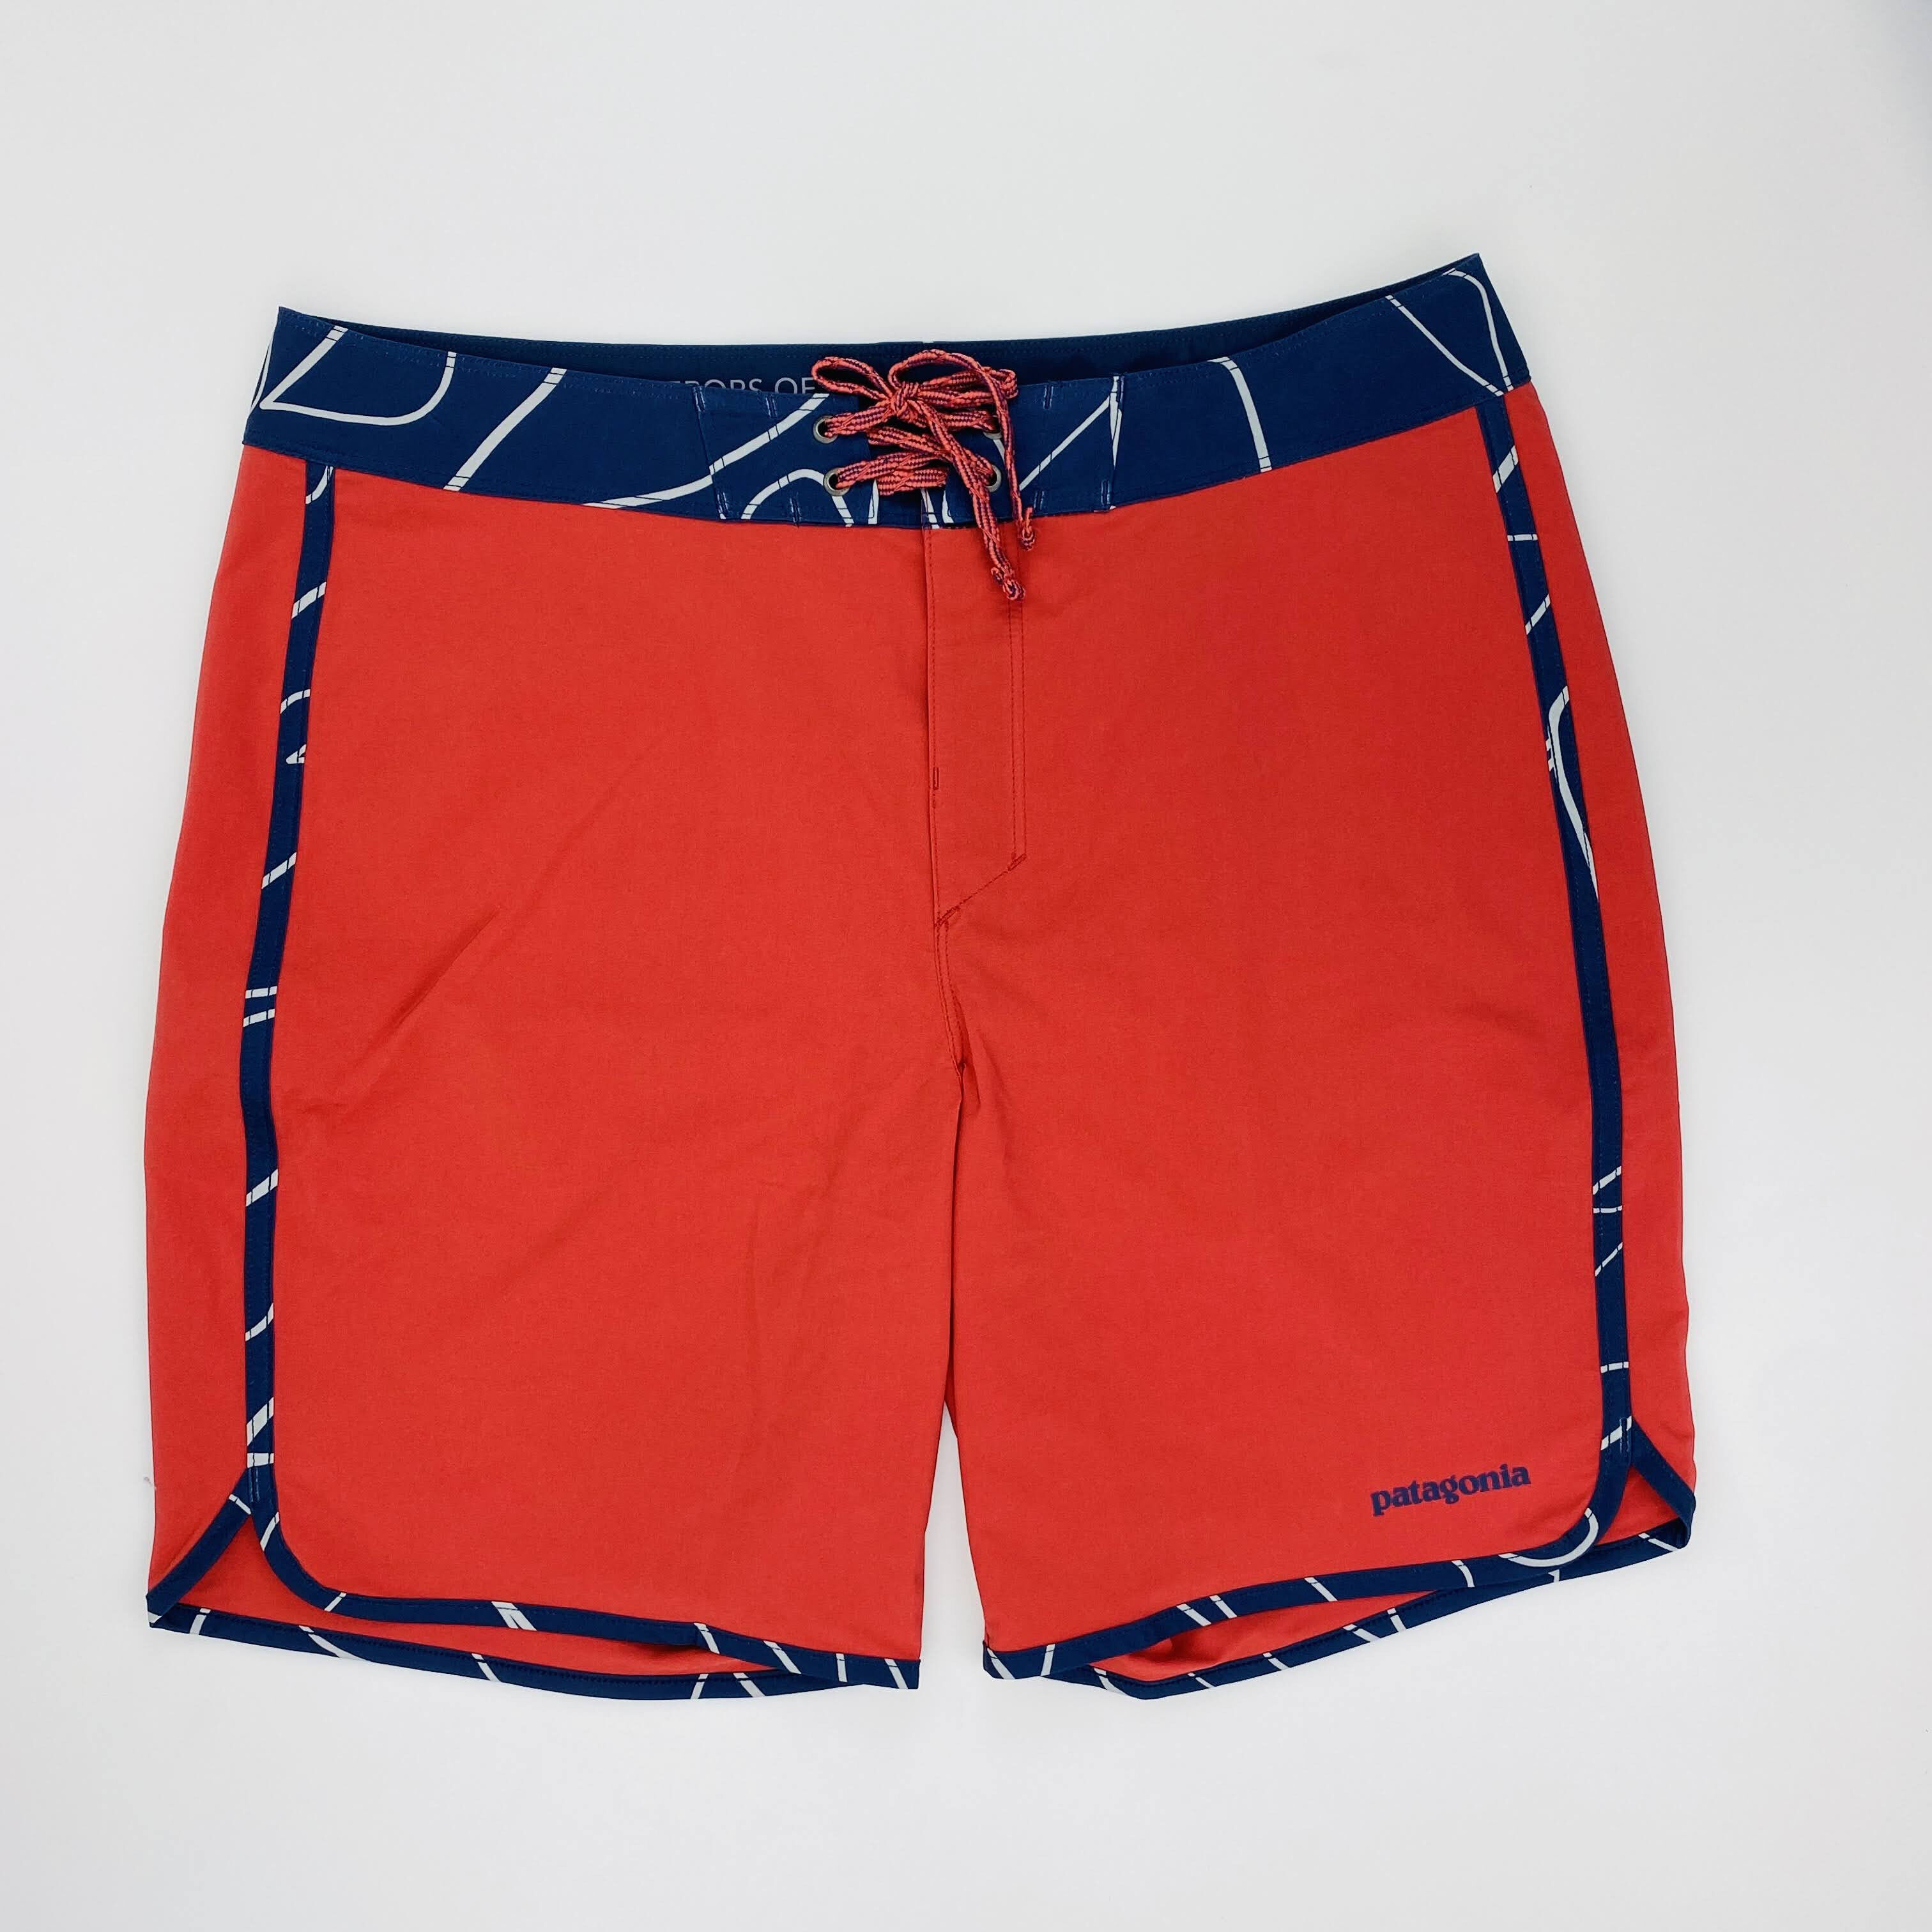 Patagonia M's Hydropeak Scallop Boardshorts - 18 in. - Second Hand Shorts - Men's - Red - 42 | Hardloop